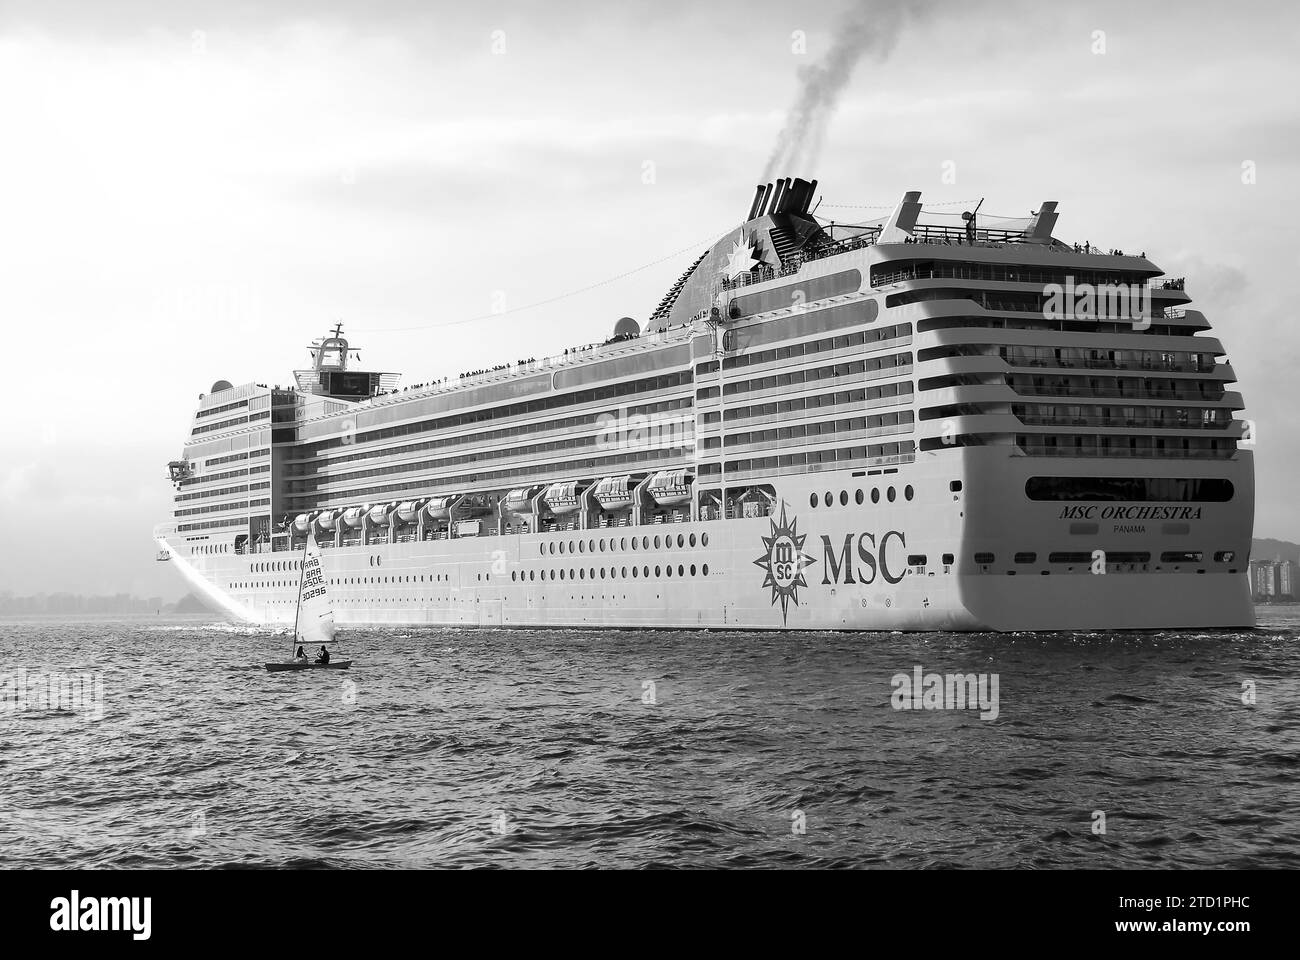 Cruise ship MSC Orchestra sailing during sunset. Sailboat next to the ship in the foreground. Black and white image. Santos city, Brazil. Stock Photo